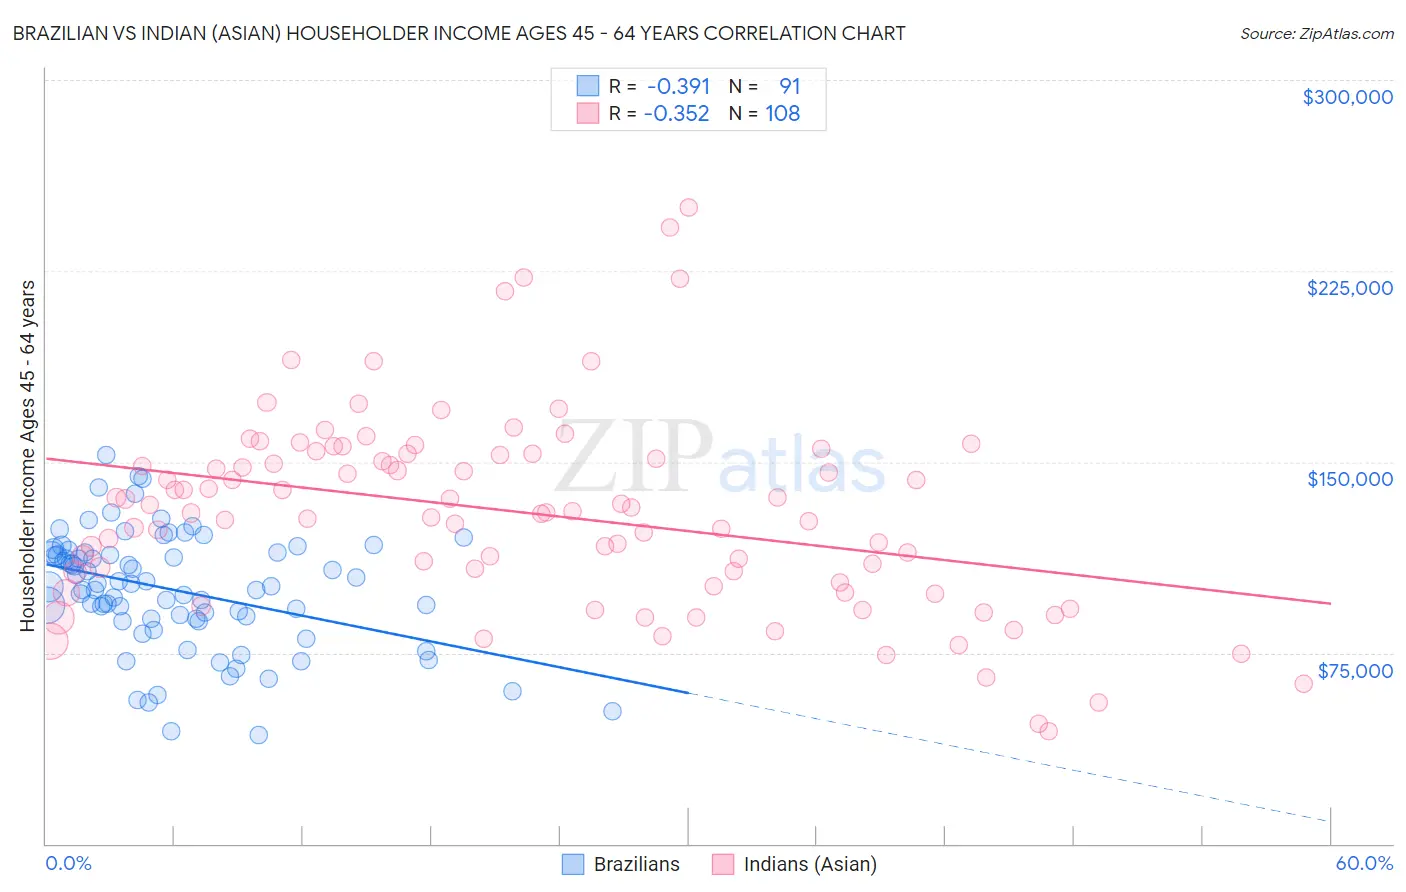 Brazilian vs Indian (Asian) Householder Income Ages 45 - 64 years